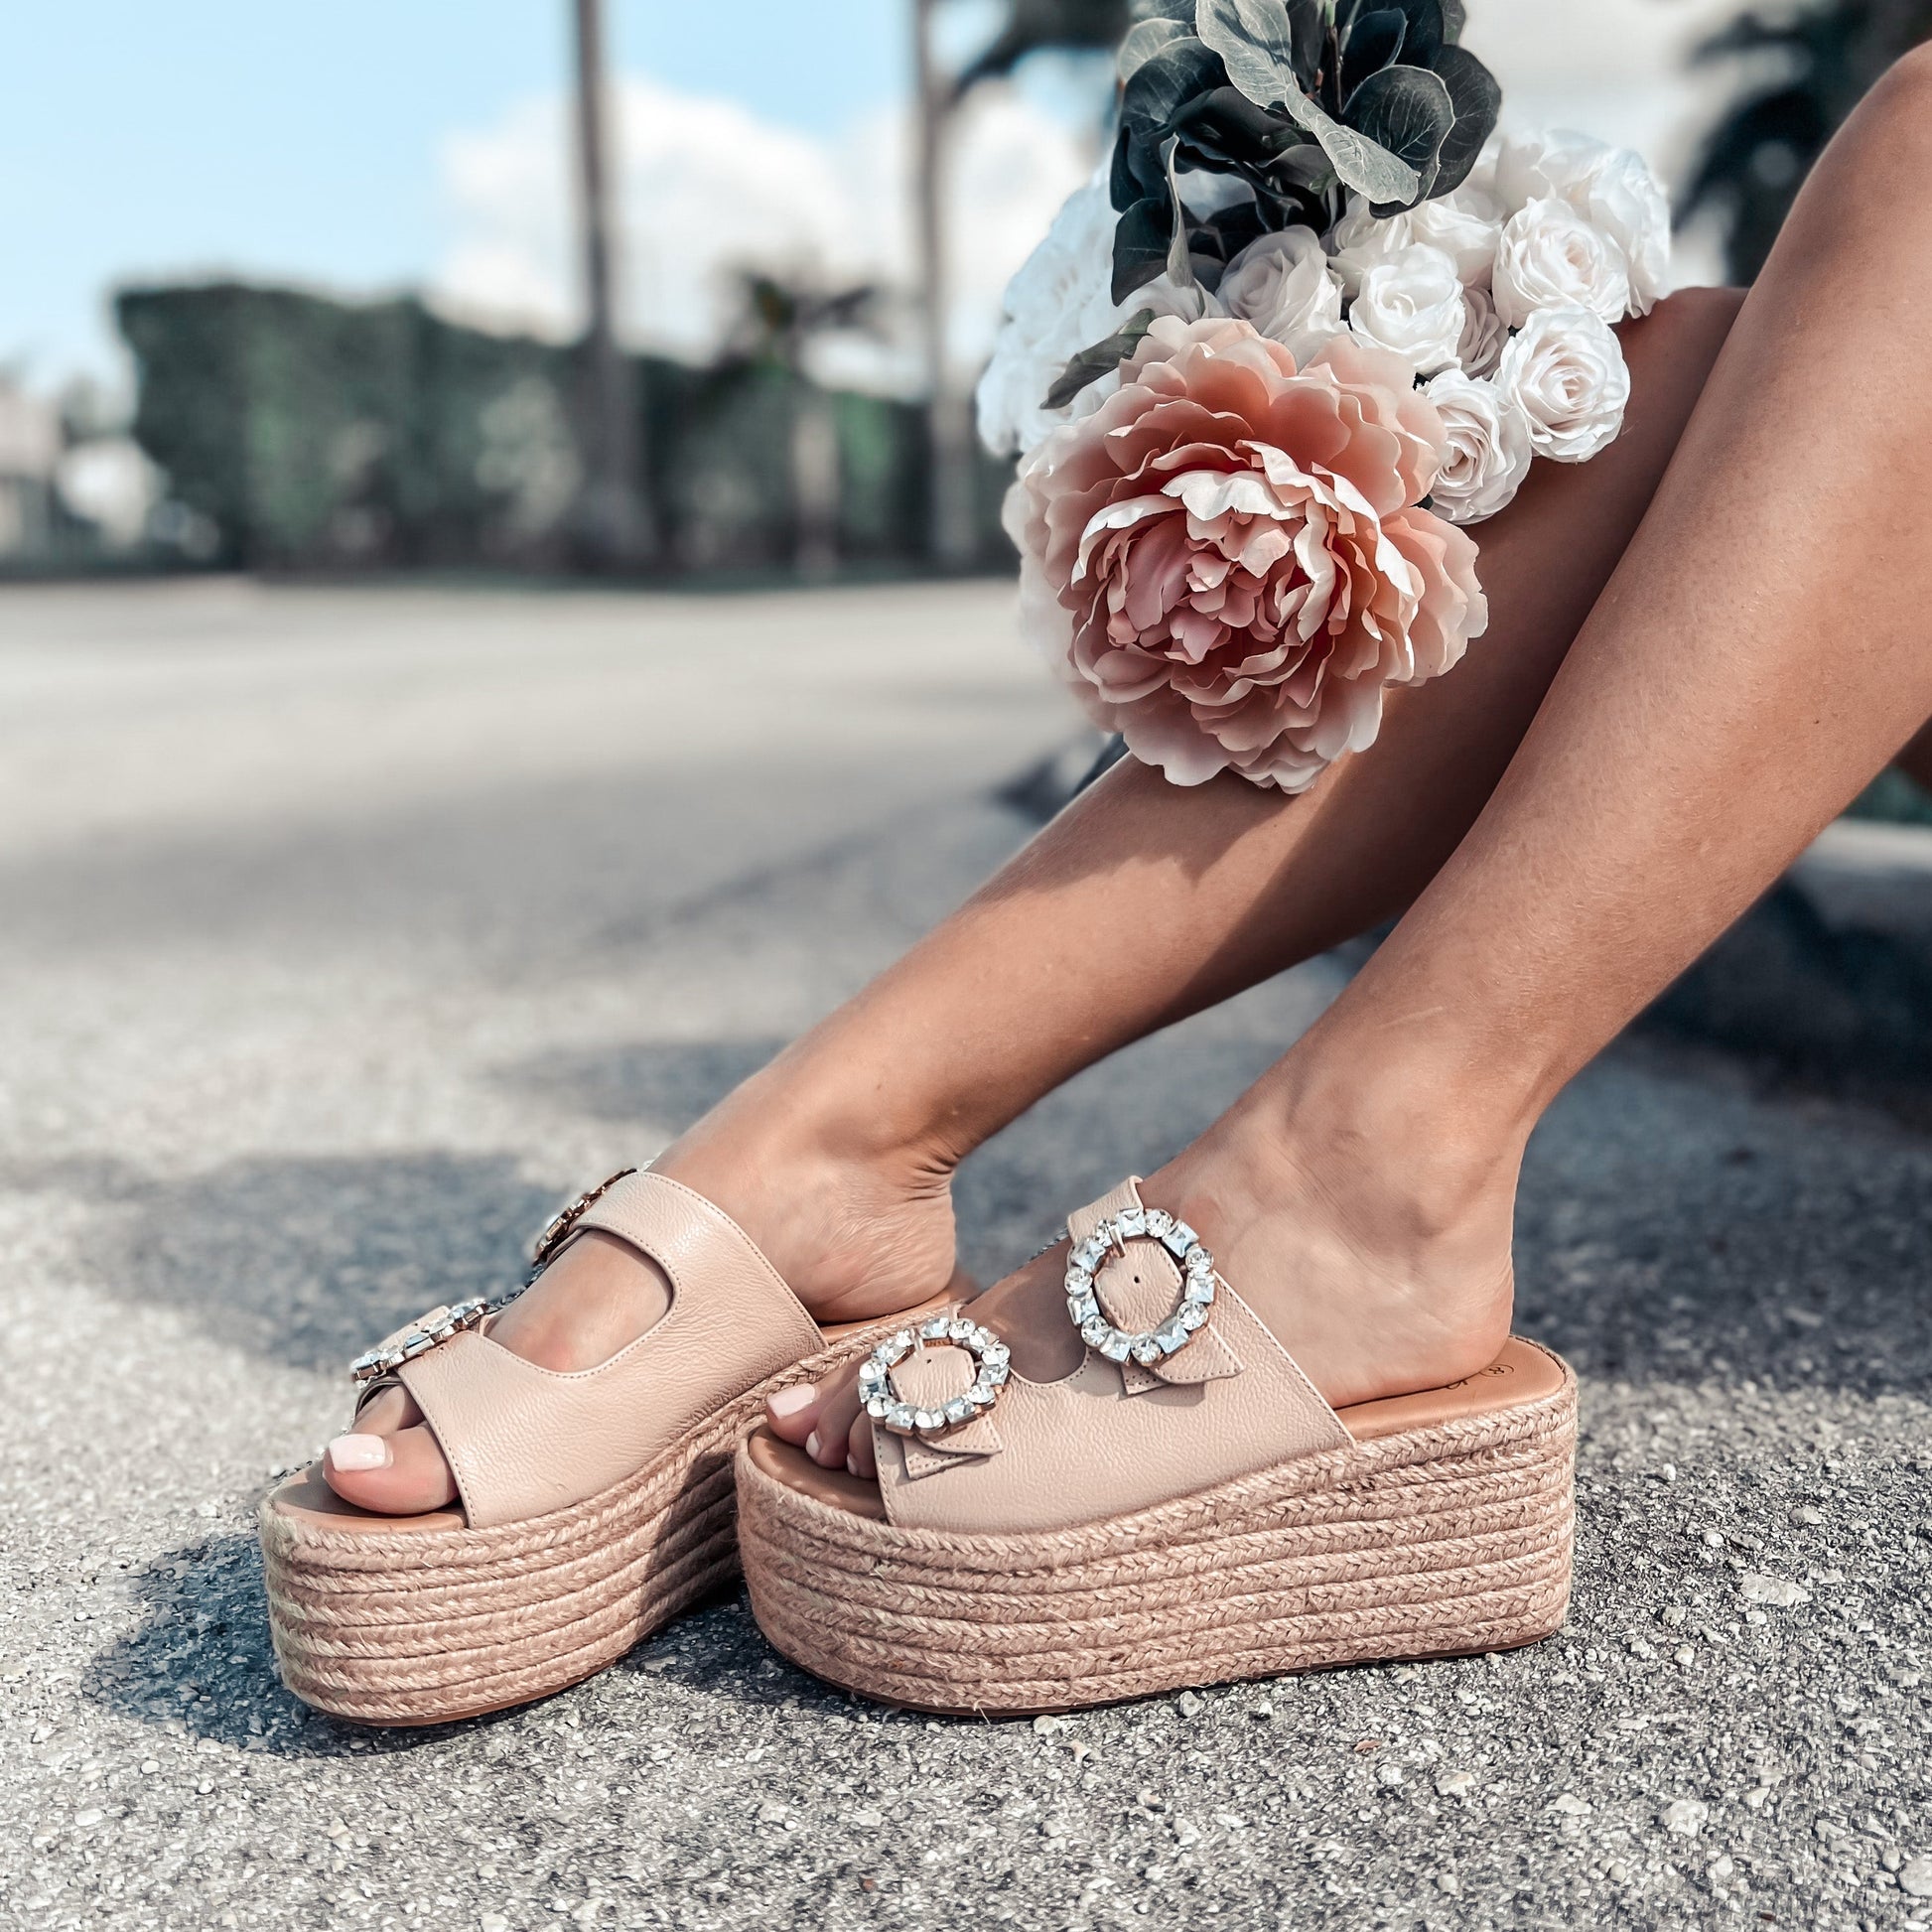 Brooke Espadrilles by Nataly Mendez Its base is lined with natural jute Leather upper with ornament Genuine Leather Handmade 3-inch heel height 2.5 inch platform